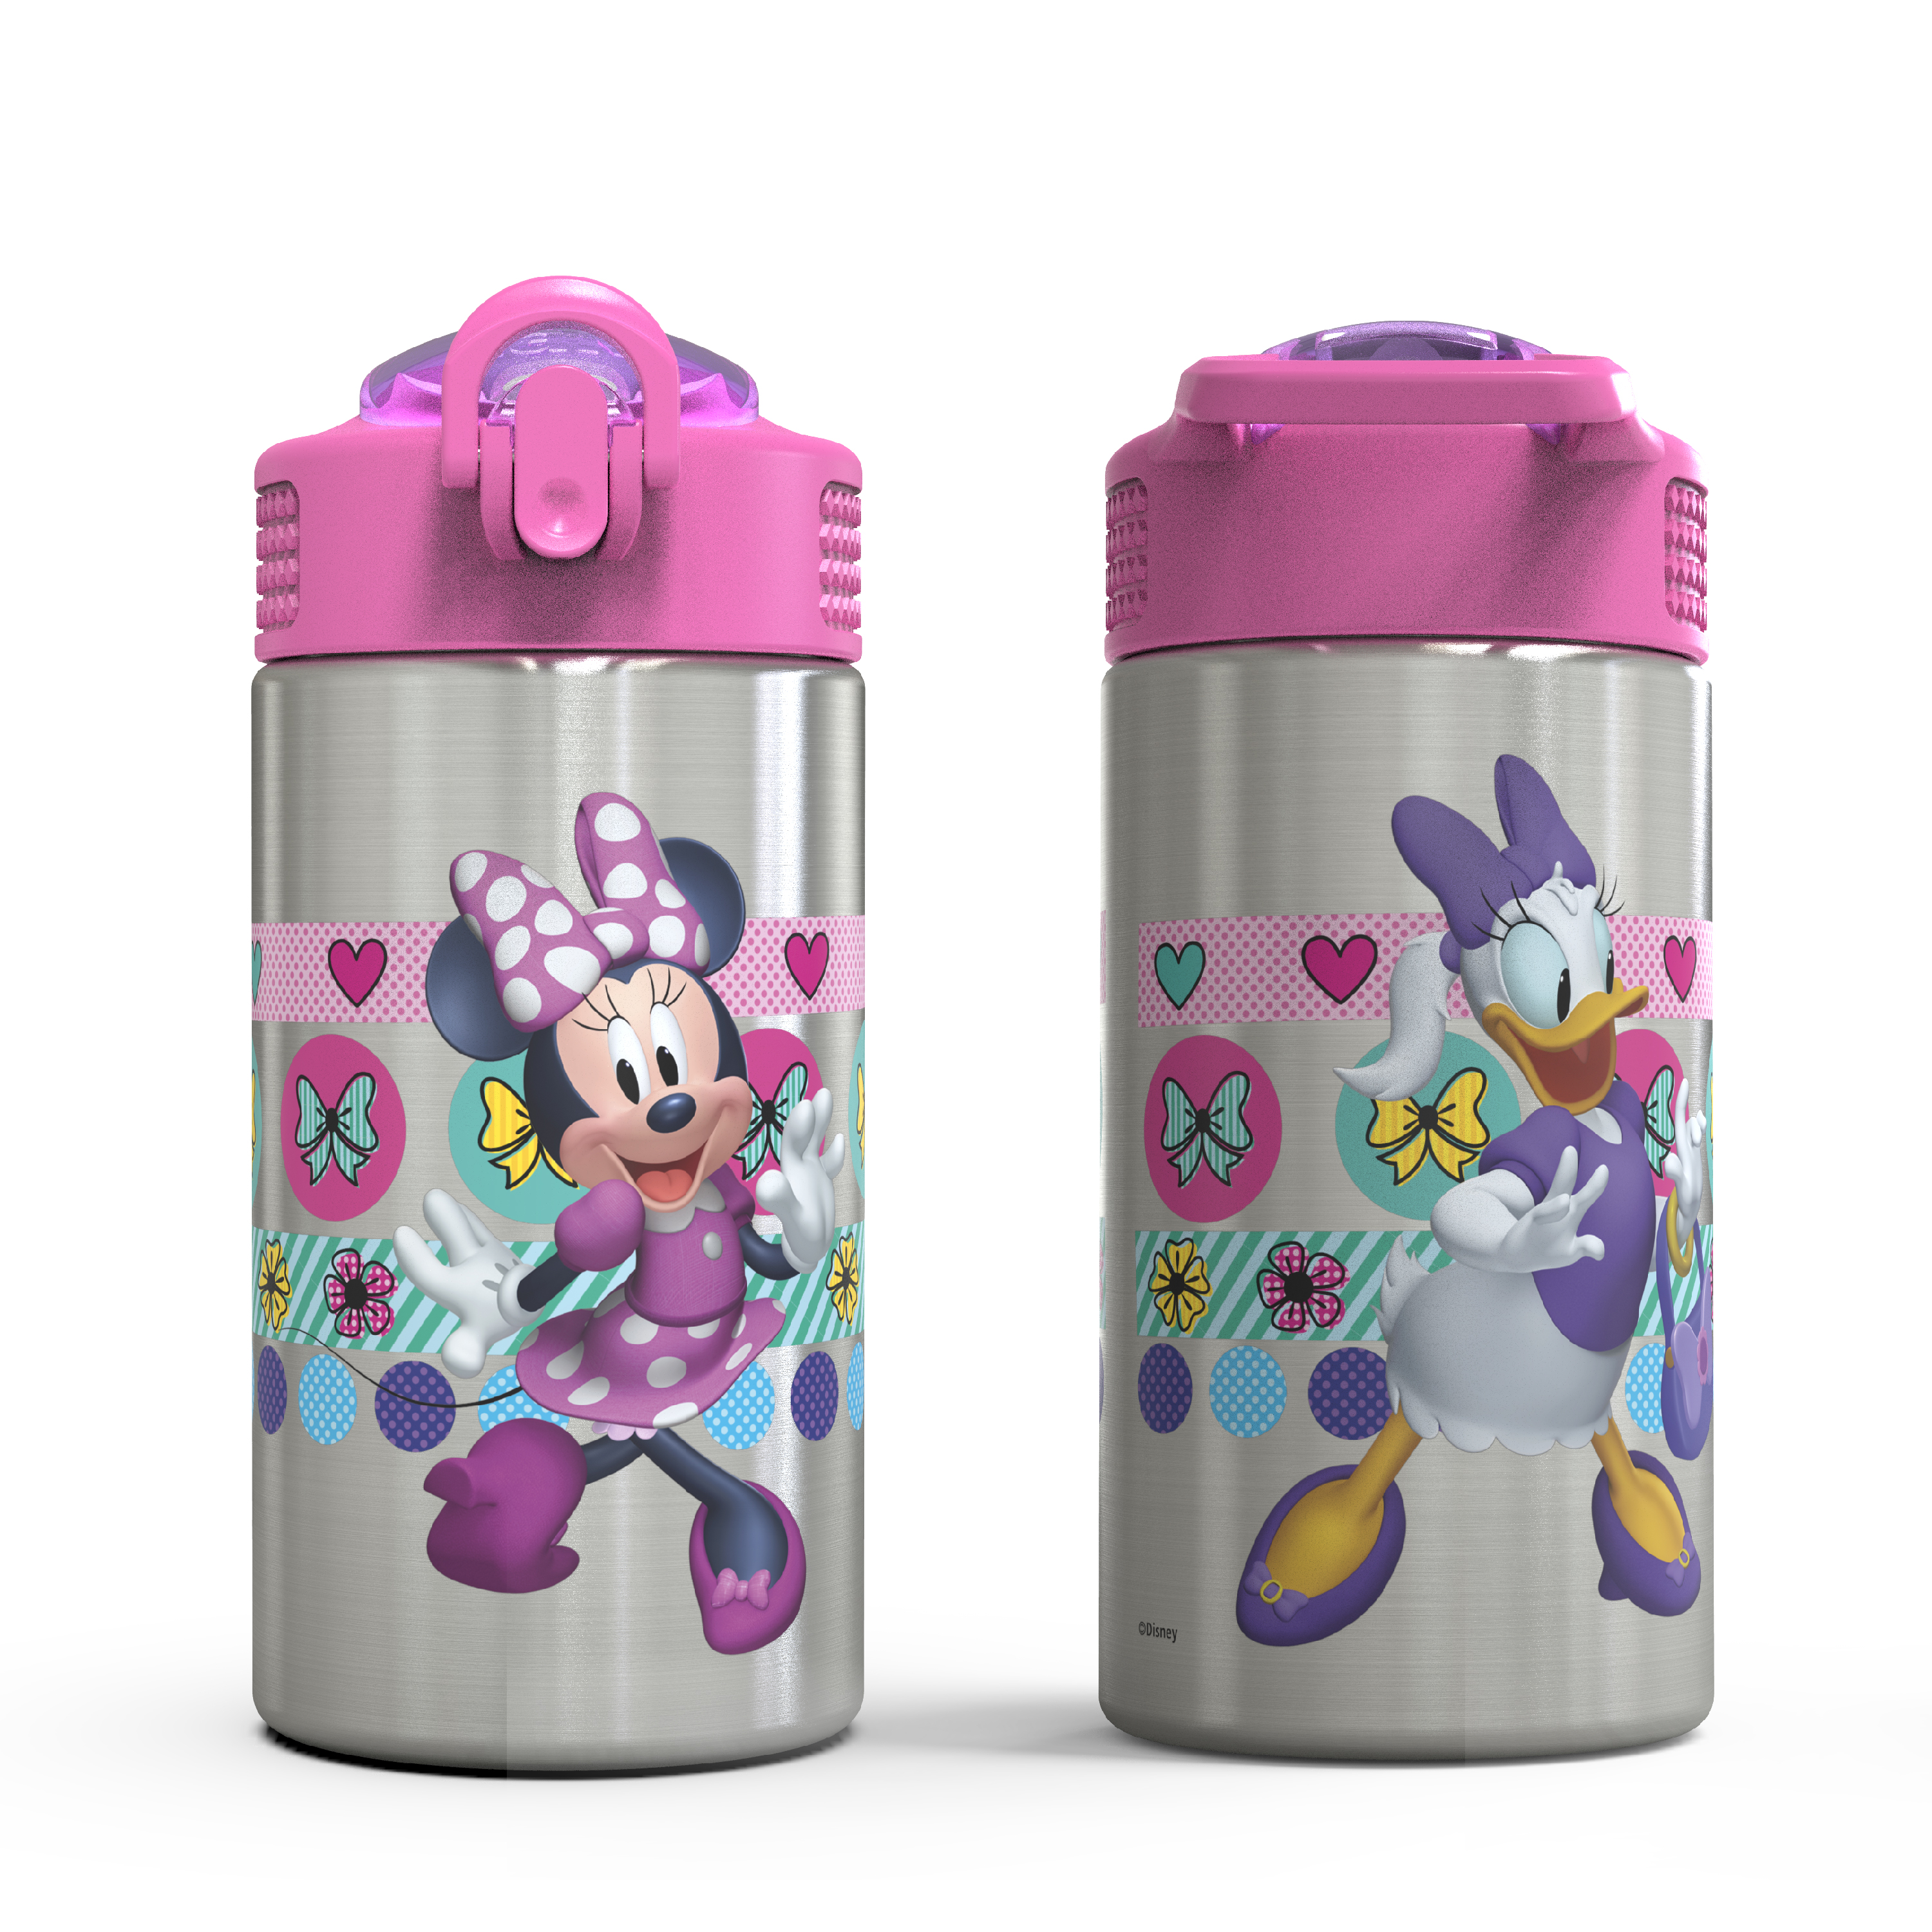 Disney 15.5 ounce Water Bottle, Minnie Mouse & Daisy Duck slideshow image 2